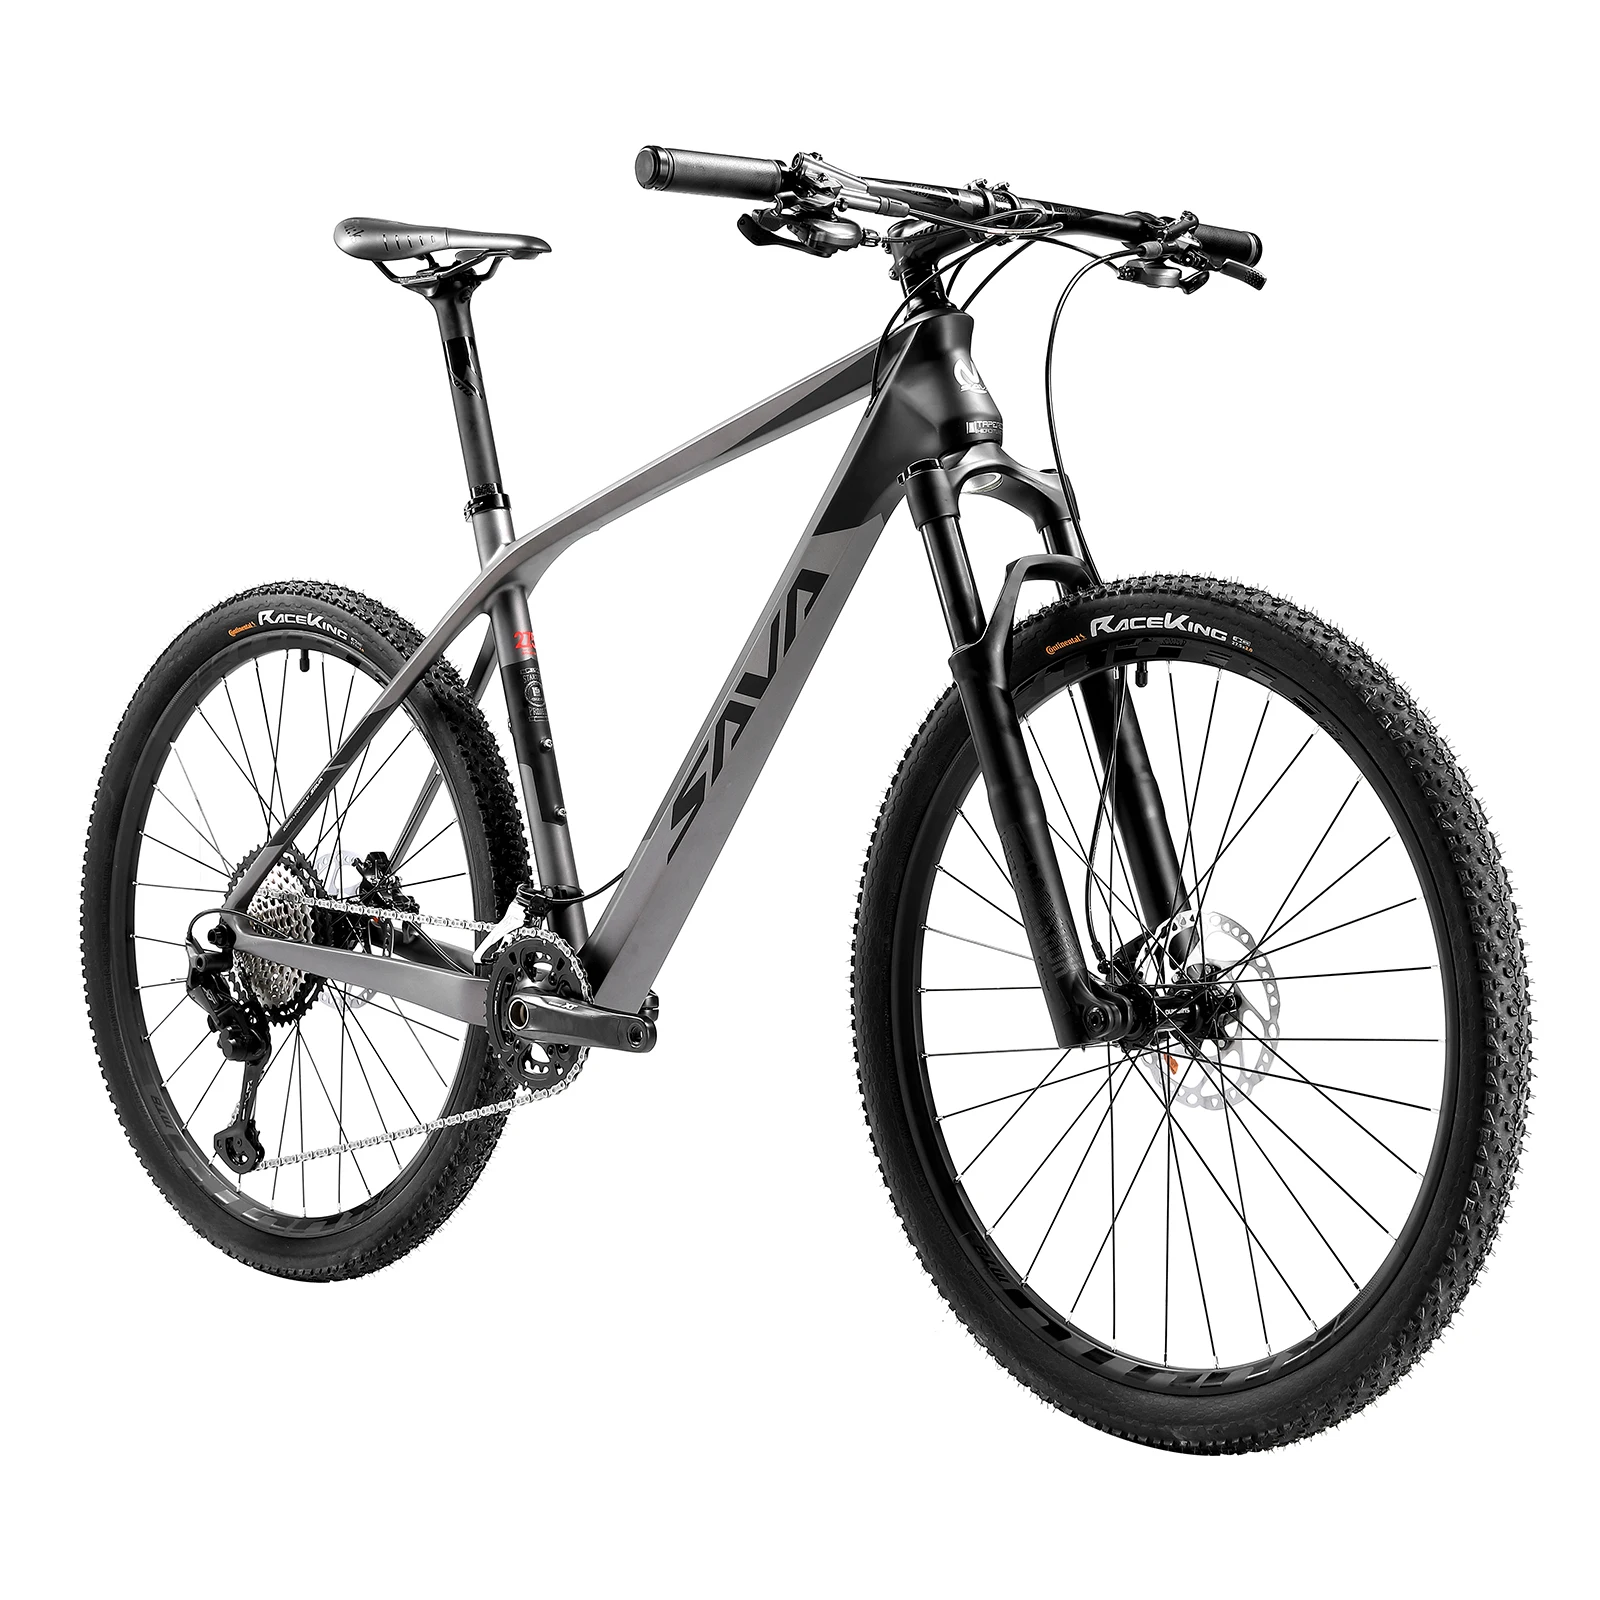 

SAVA 29 Mountain Bike Carbon MTB 29 inch Adult Mountain Bicycle with SHIMANO DEORE XT M8100 2x12 Speeds and ROCKSHOX Air fork, Black green/black grey